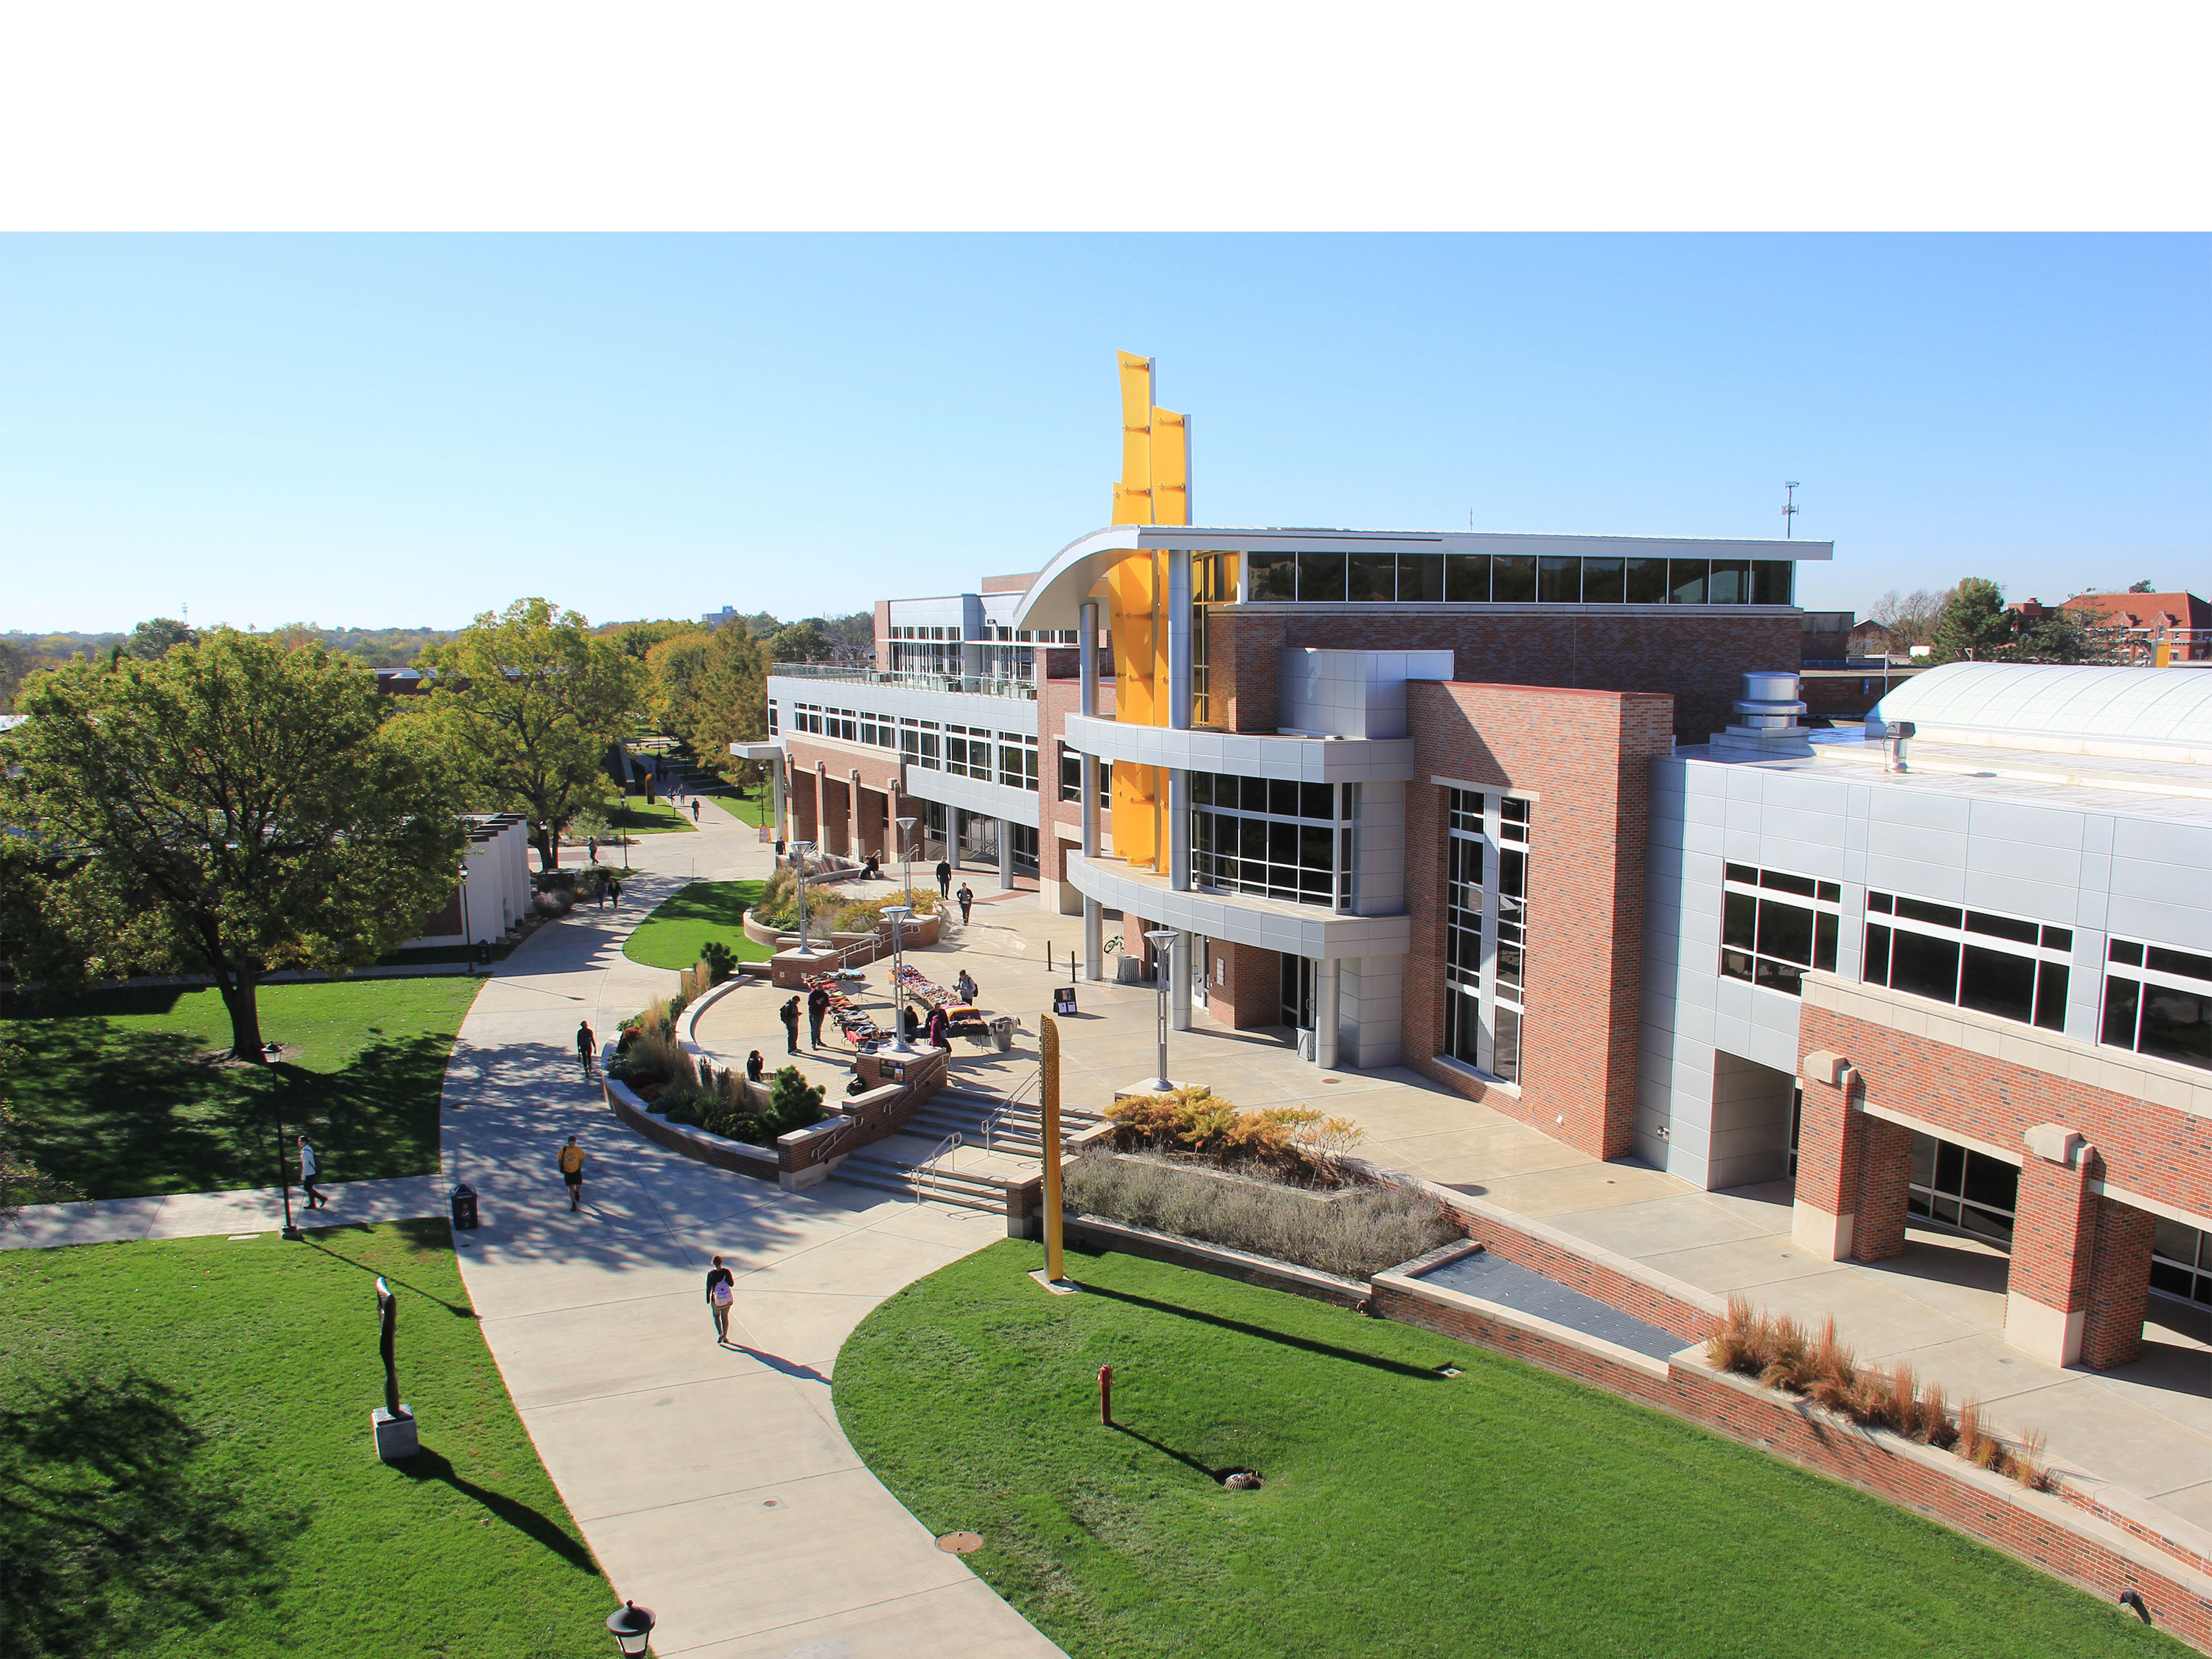 A view of the Rhatigan Student Center at Wichita State University.